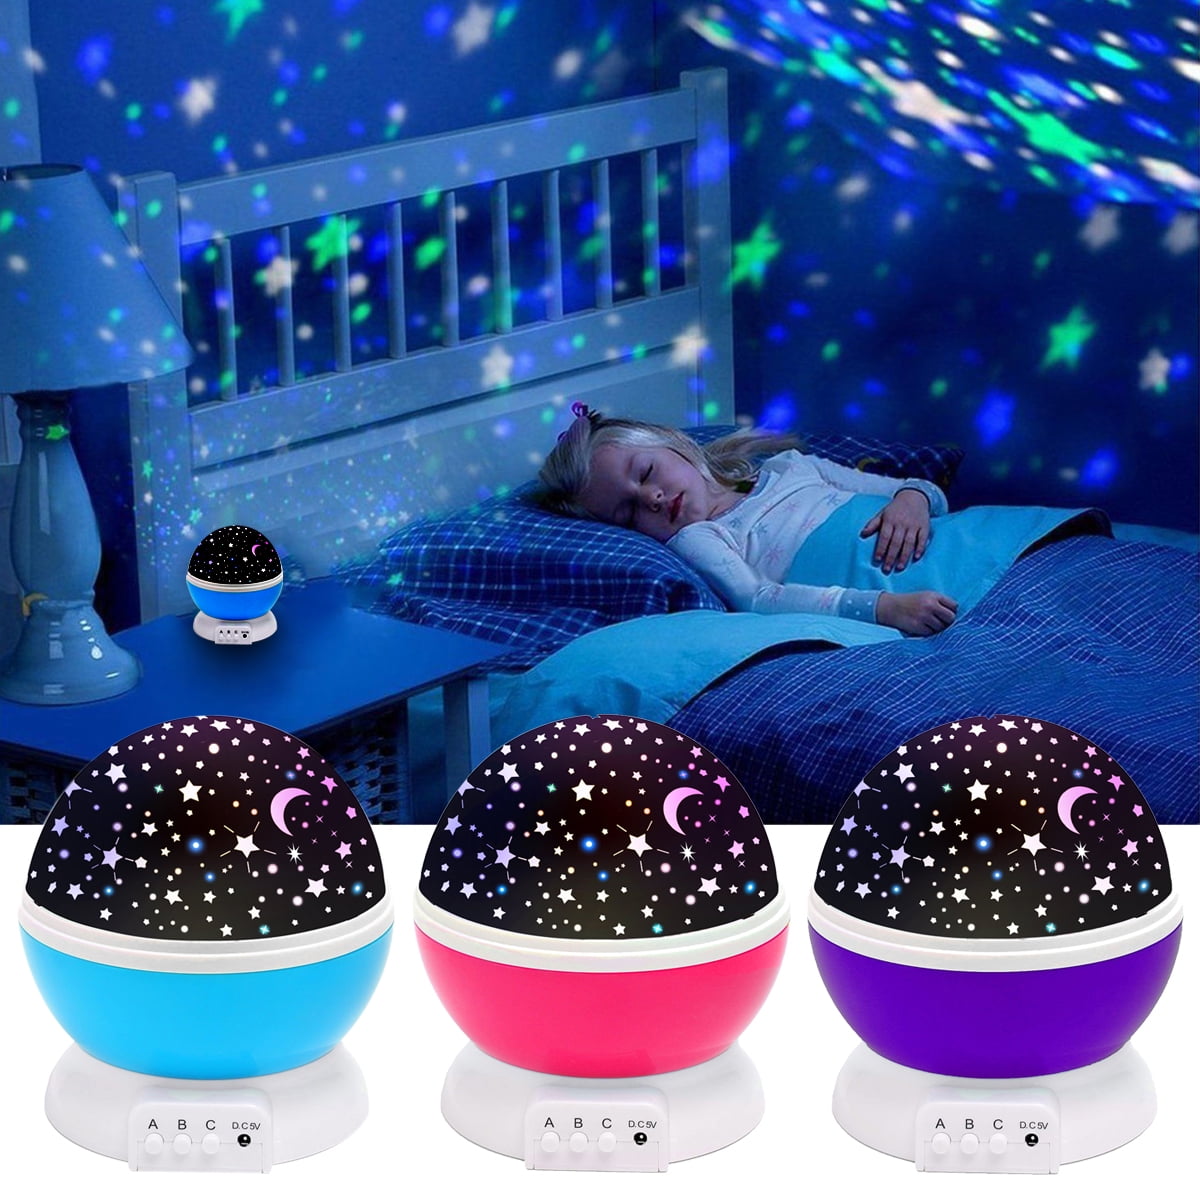 Star Projector Lamp Night Light 360 Degree Rotating Cosmos Star Projector,  Starry Moon Sky Night Projector Kids Bedroom Desk Lamp 4 LEDs 5 Colors  Changing with USB Cable, for Birthady Gift Christ 